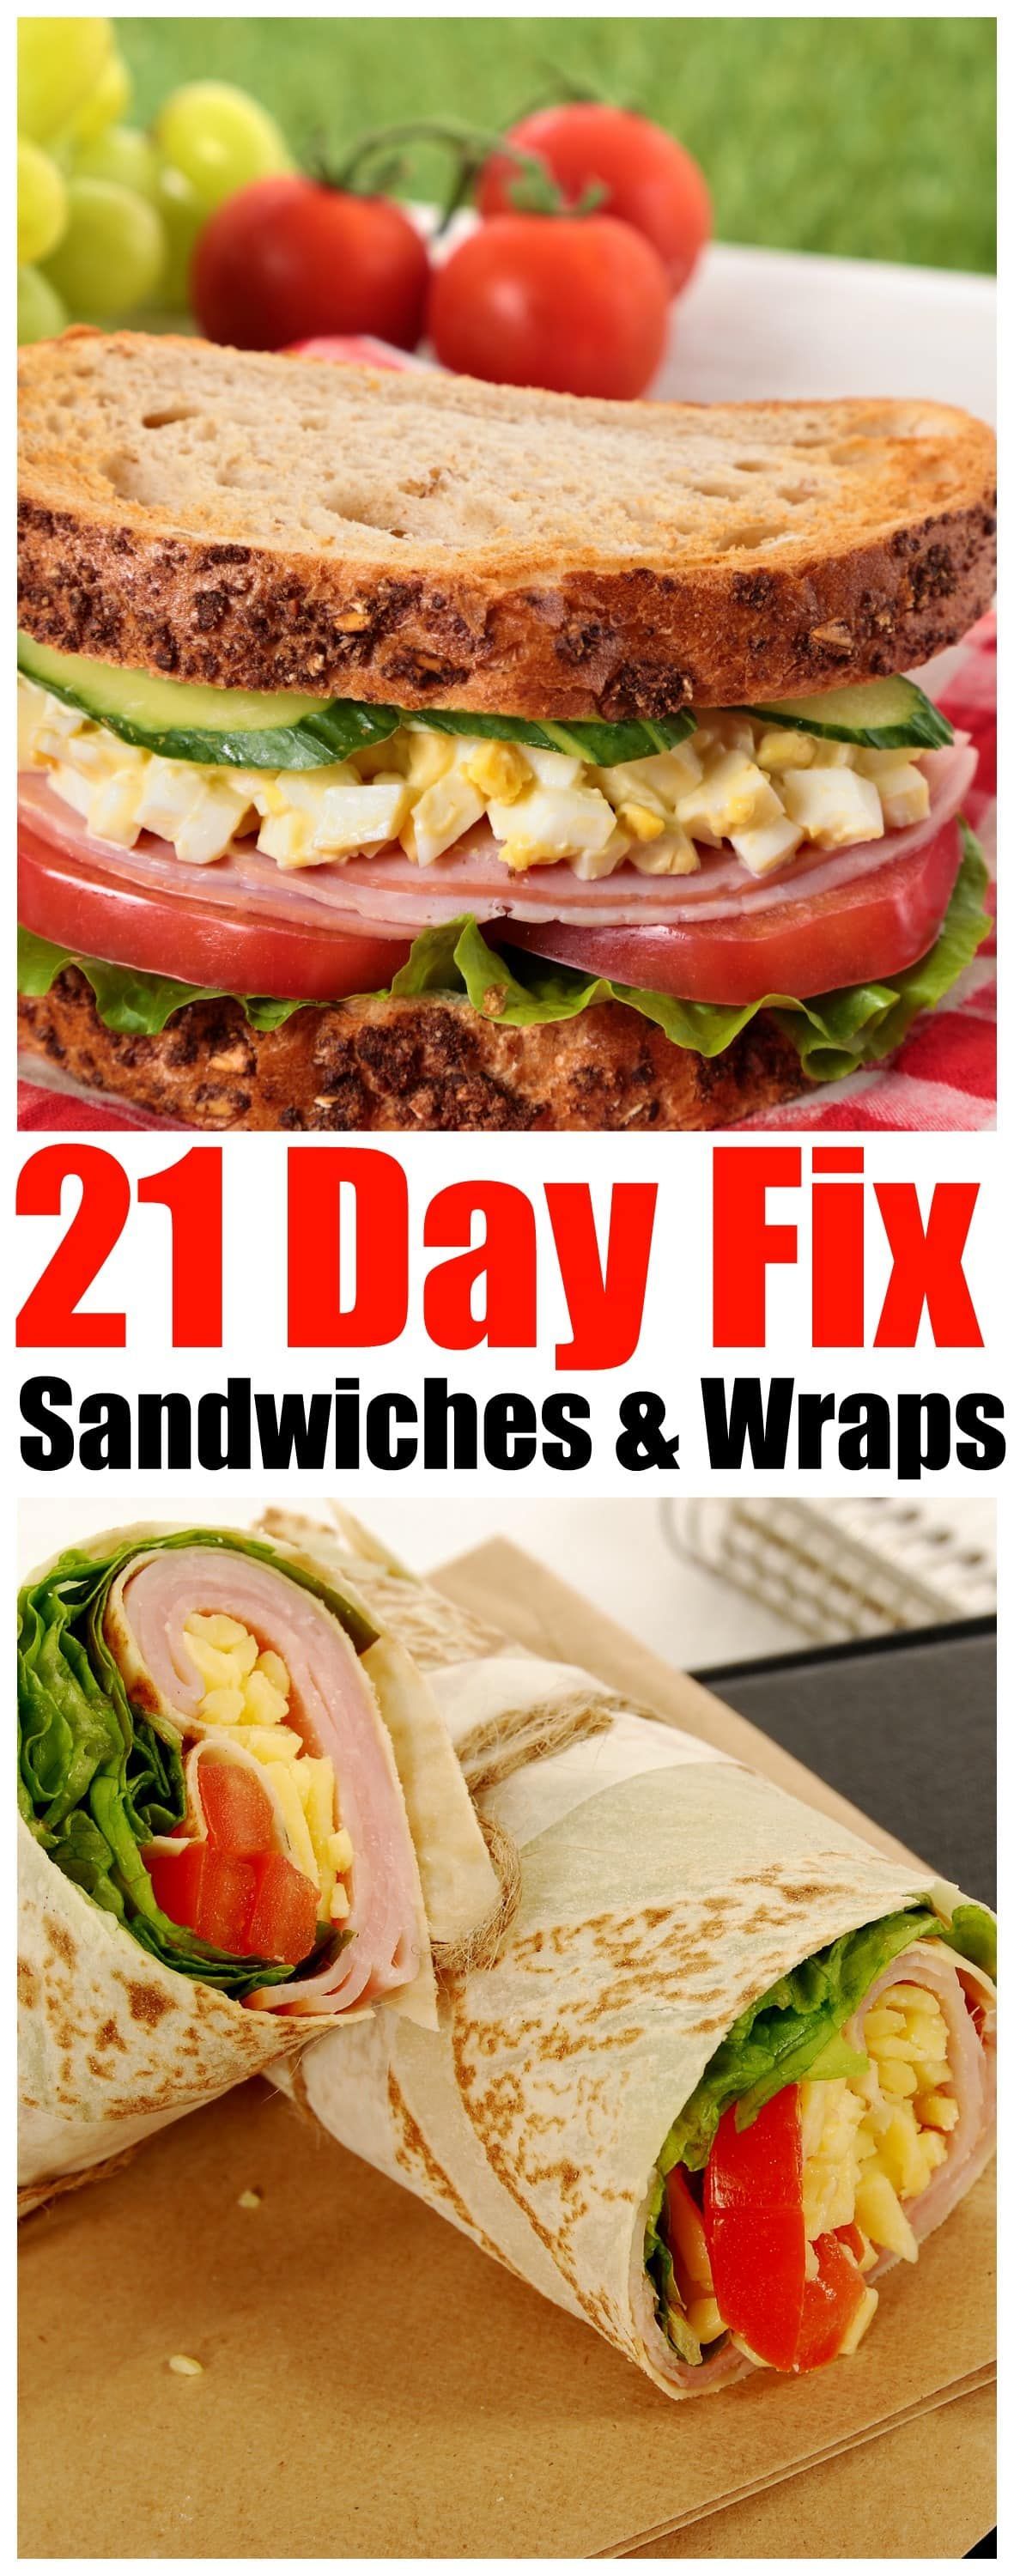 21 Day Fix sandwiches and wraps – Forget Takeout! Eat Easy and Delicious 21-Day Fix Sandwiches that you can make Every Day – dont